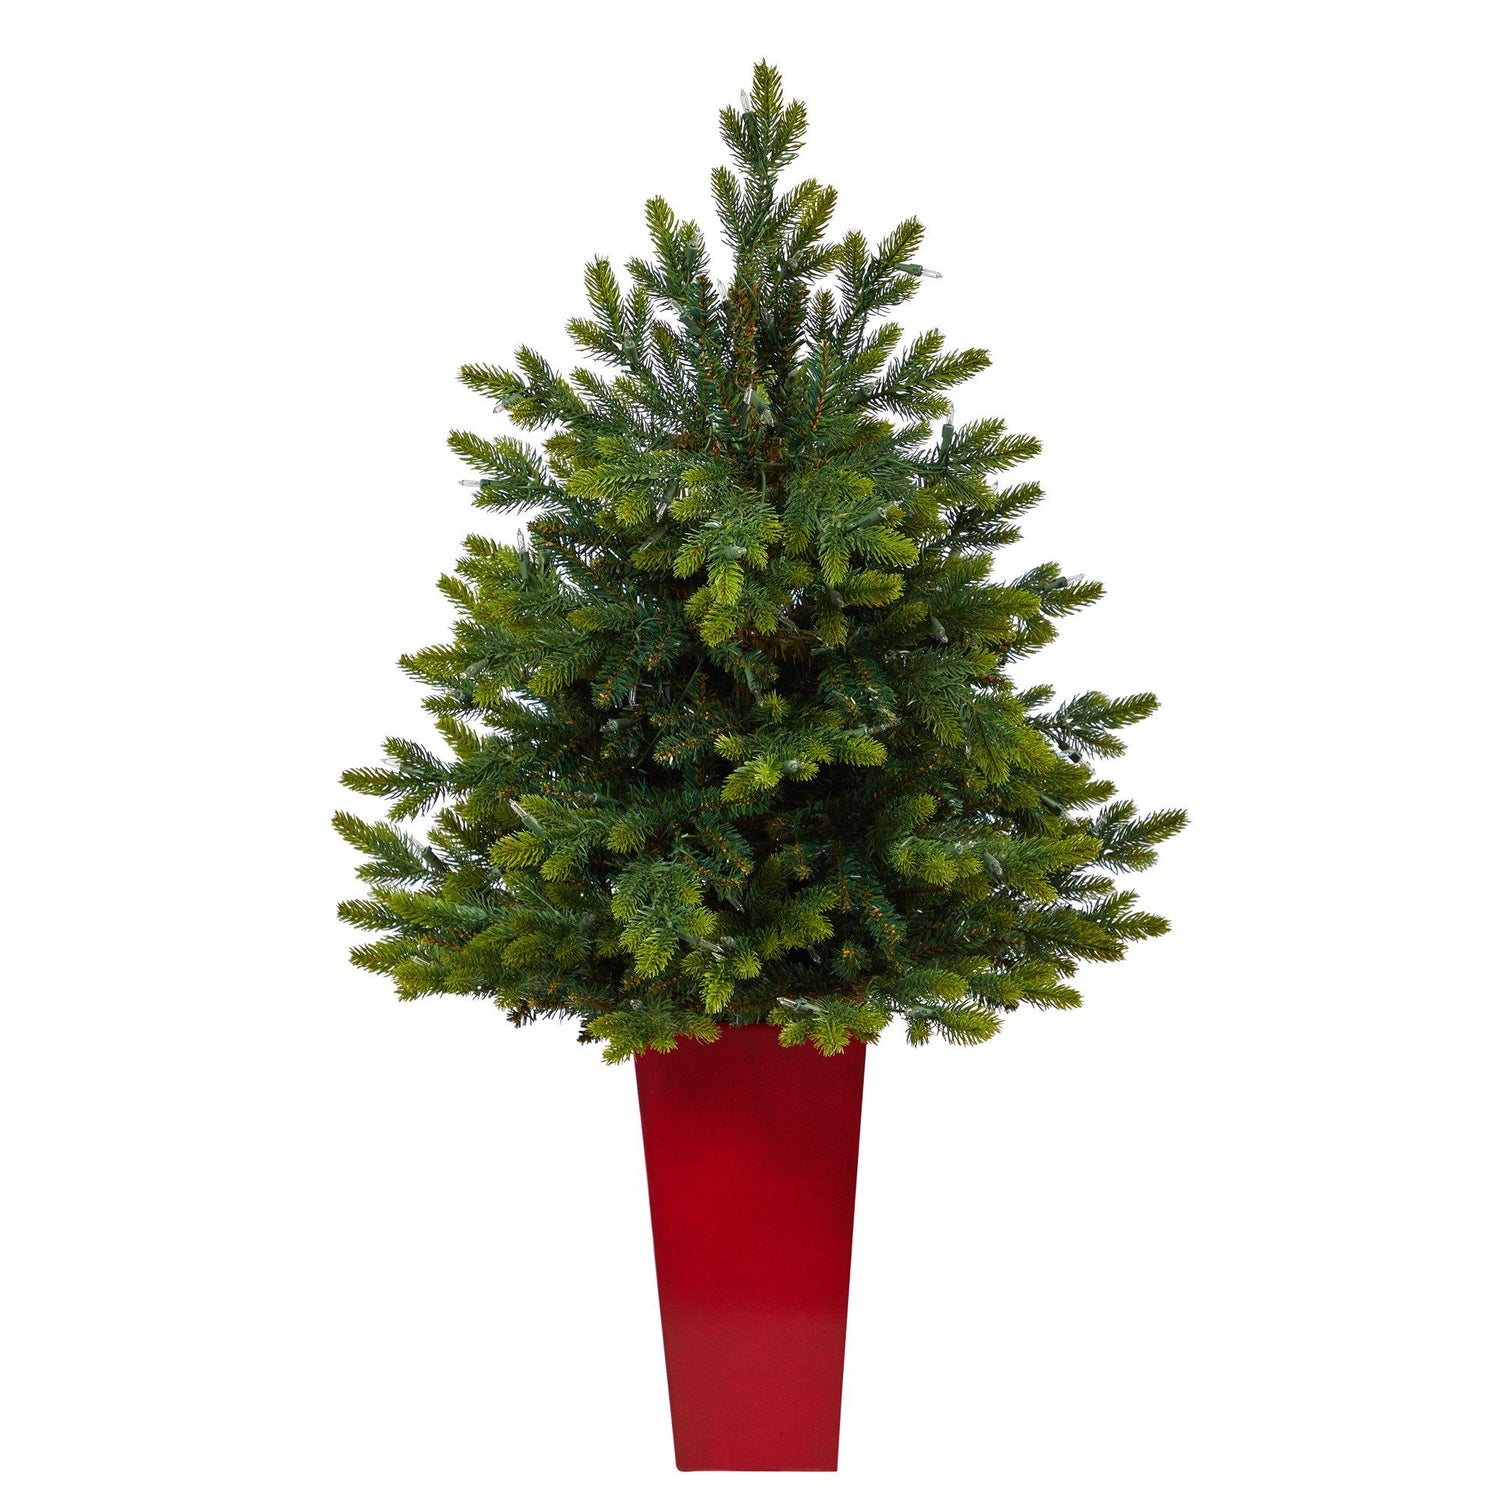 44” North Carolina Fir Artificial Christmas Tree with 150 Clear Lights and 563 Bendable Branches in Red Tower Planter